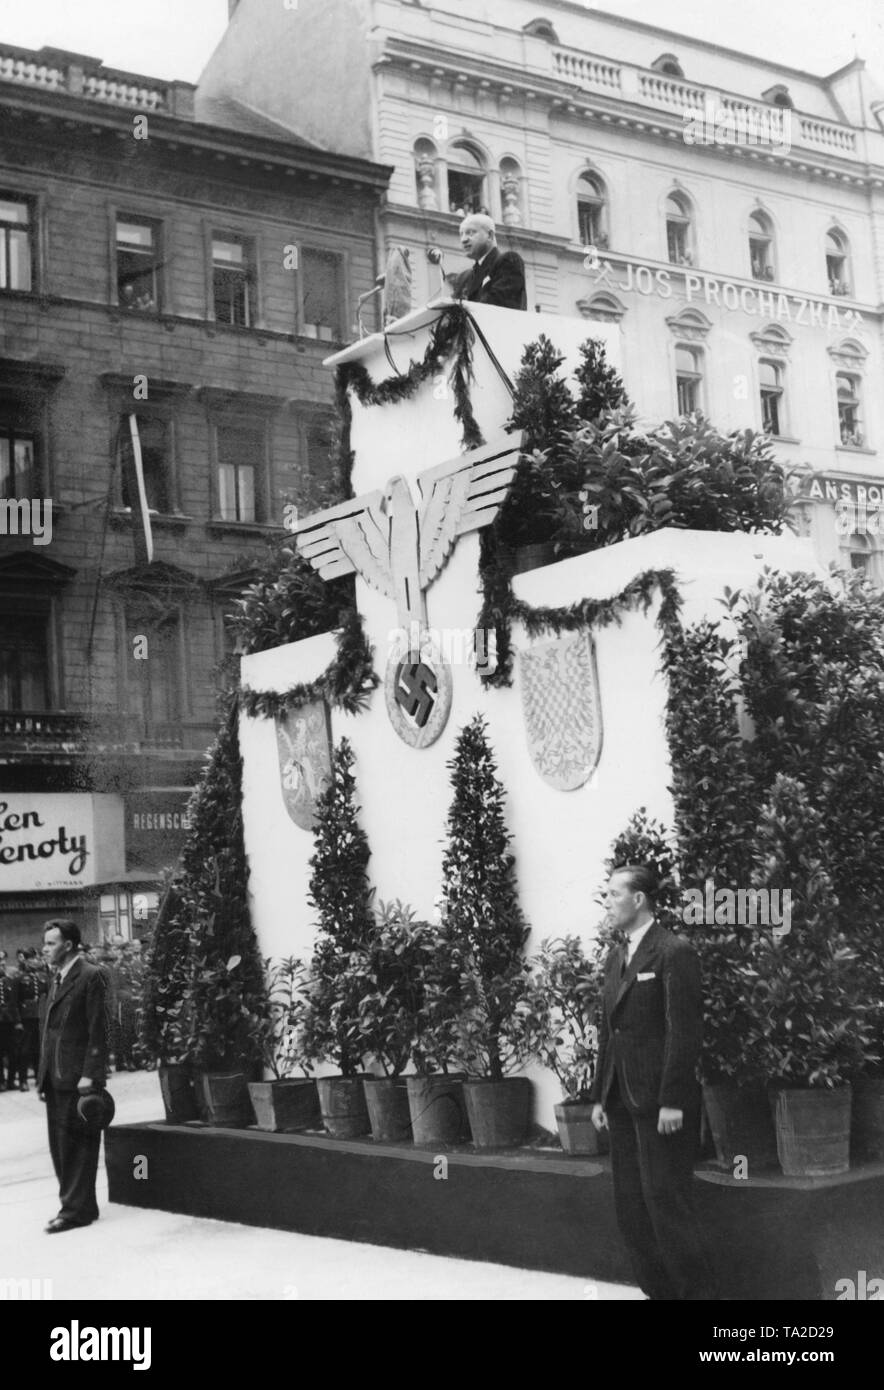 Minister of Public Enlightenment and Propaganda Emanuel Moravec gives a speech at a rally at Wenceslas Square in Prague. He gives an account of the activities of the protectorate government. Stock Photo